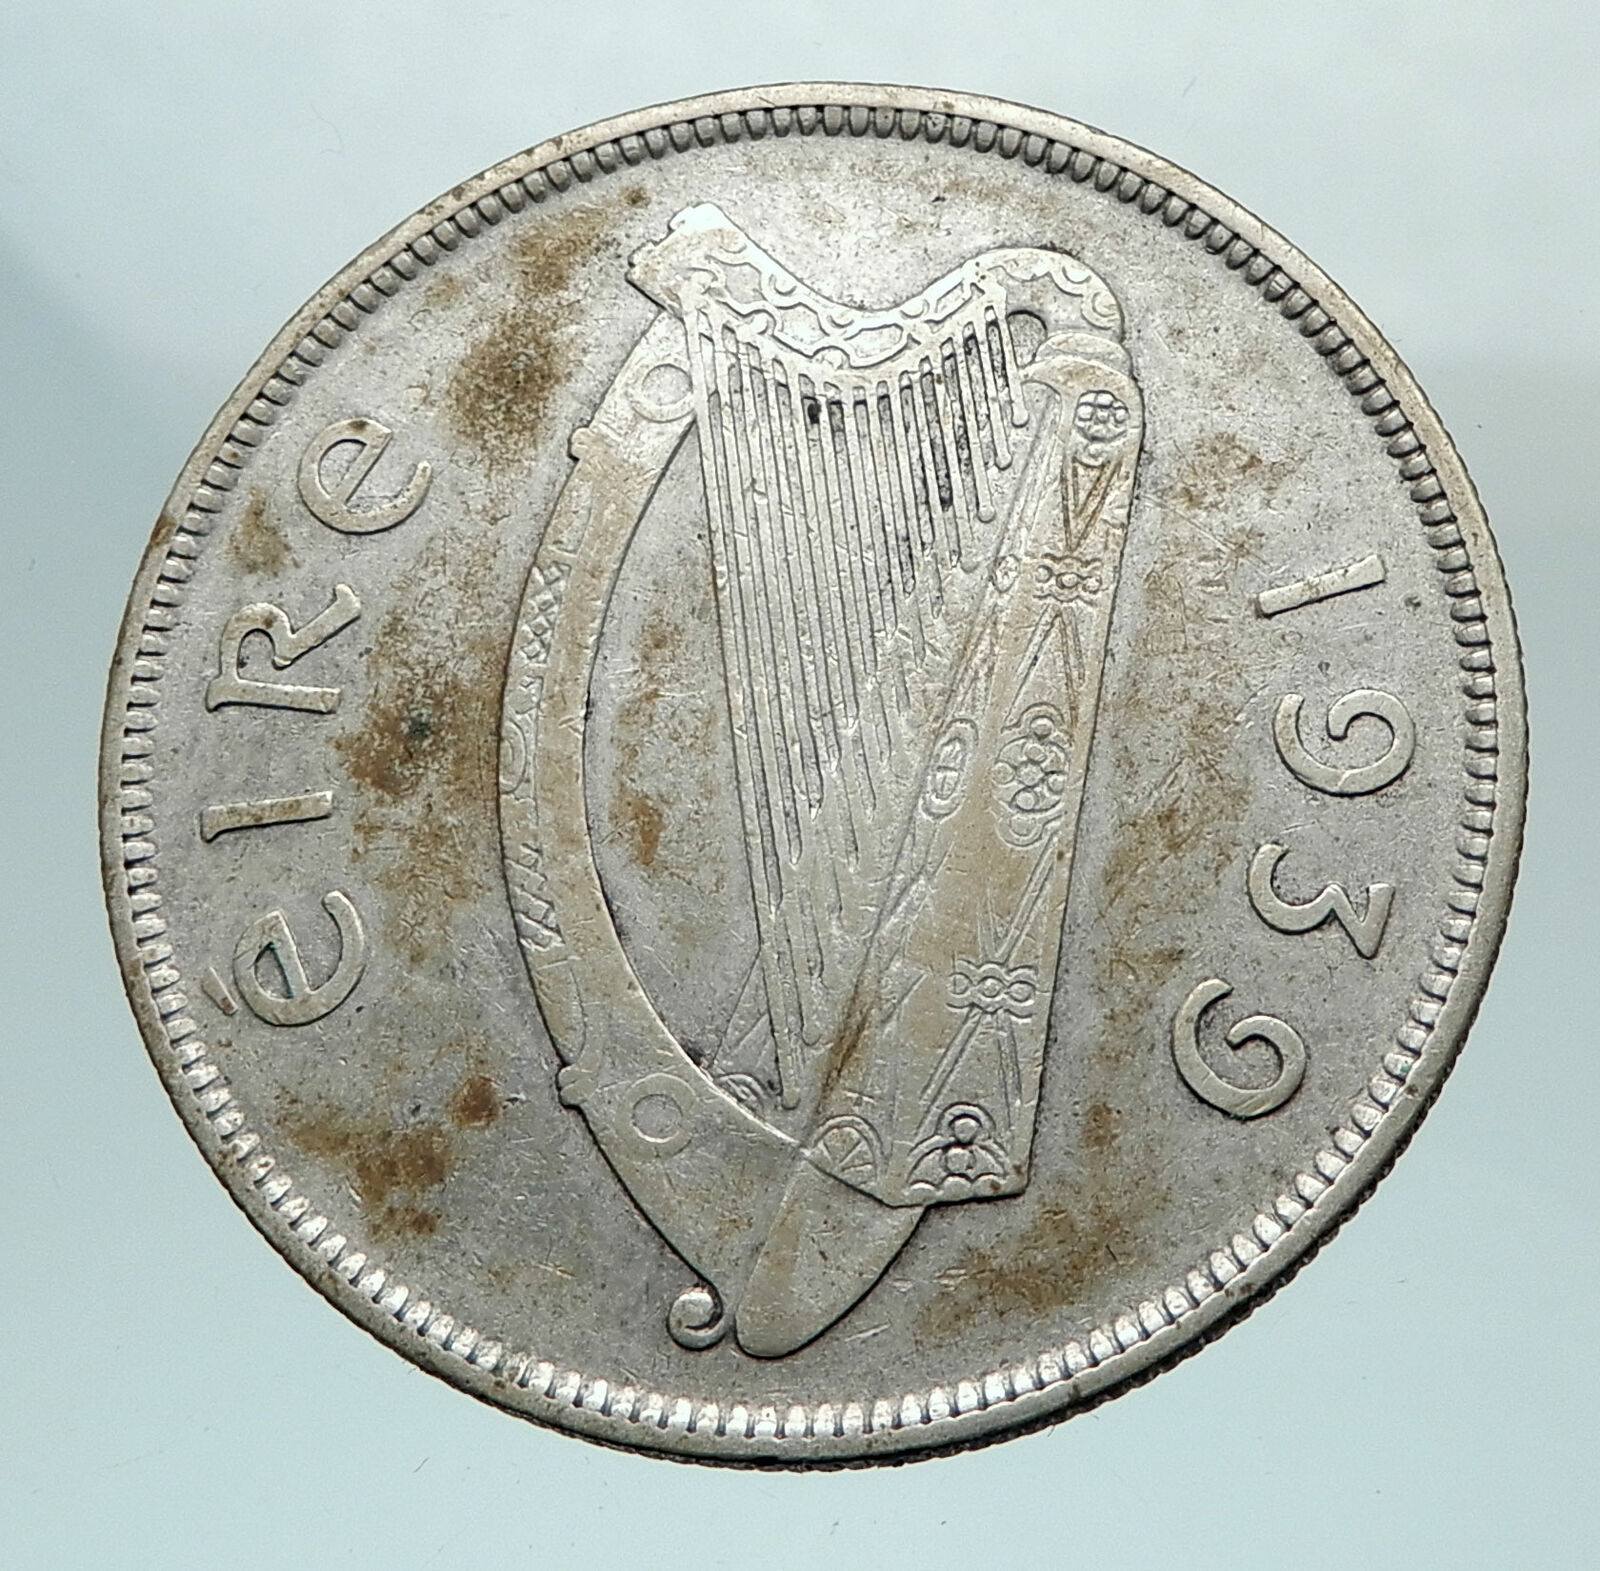 1939 IRELAND Silver with HORSE and LYRE HARP Vintage Genuine IRISH Coin i80246